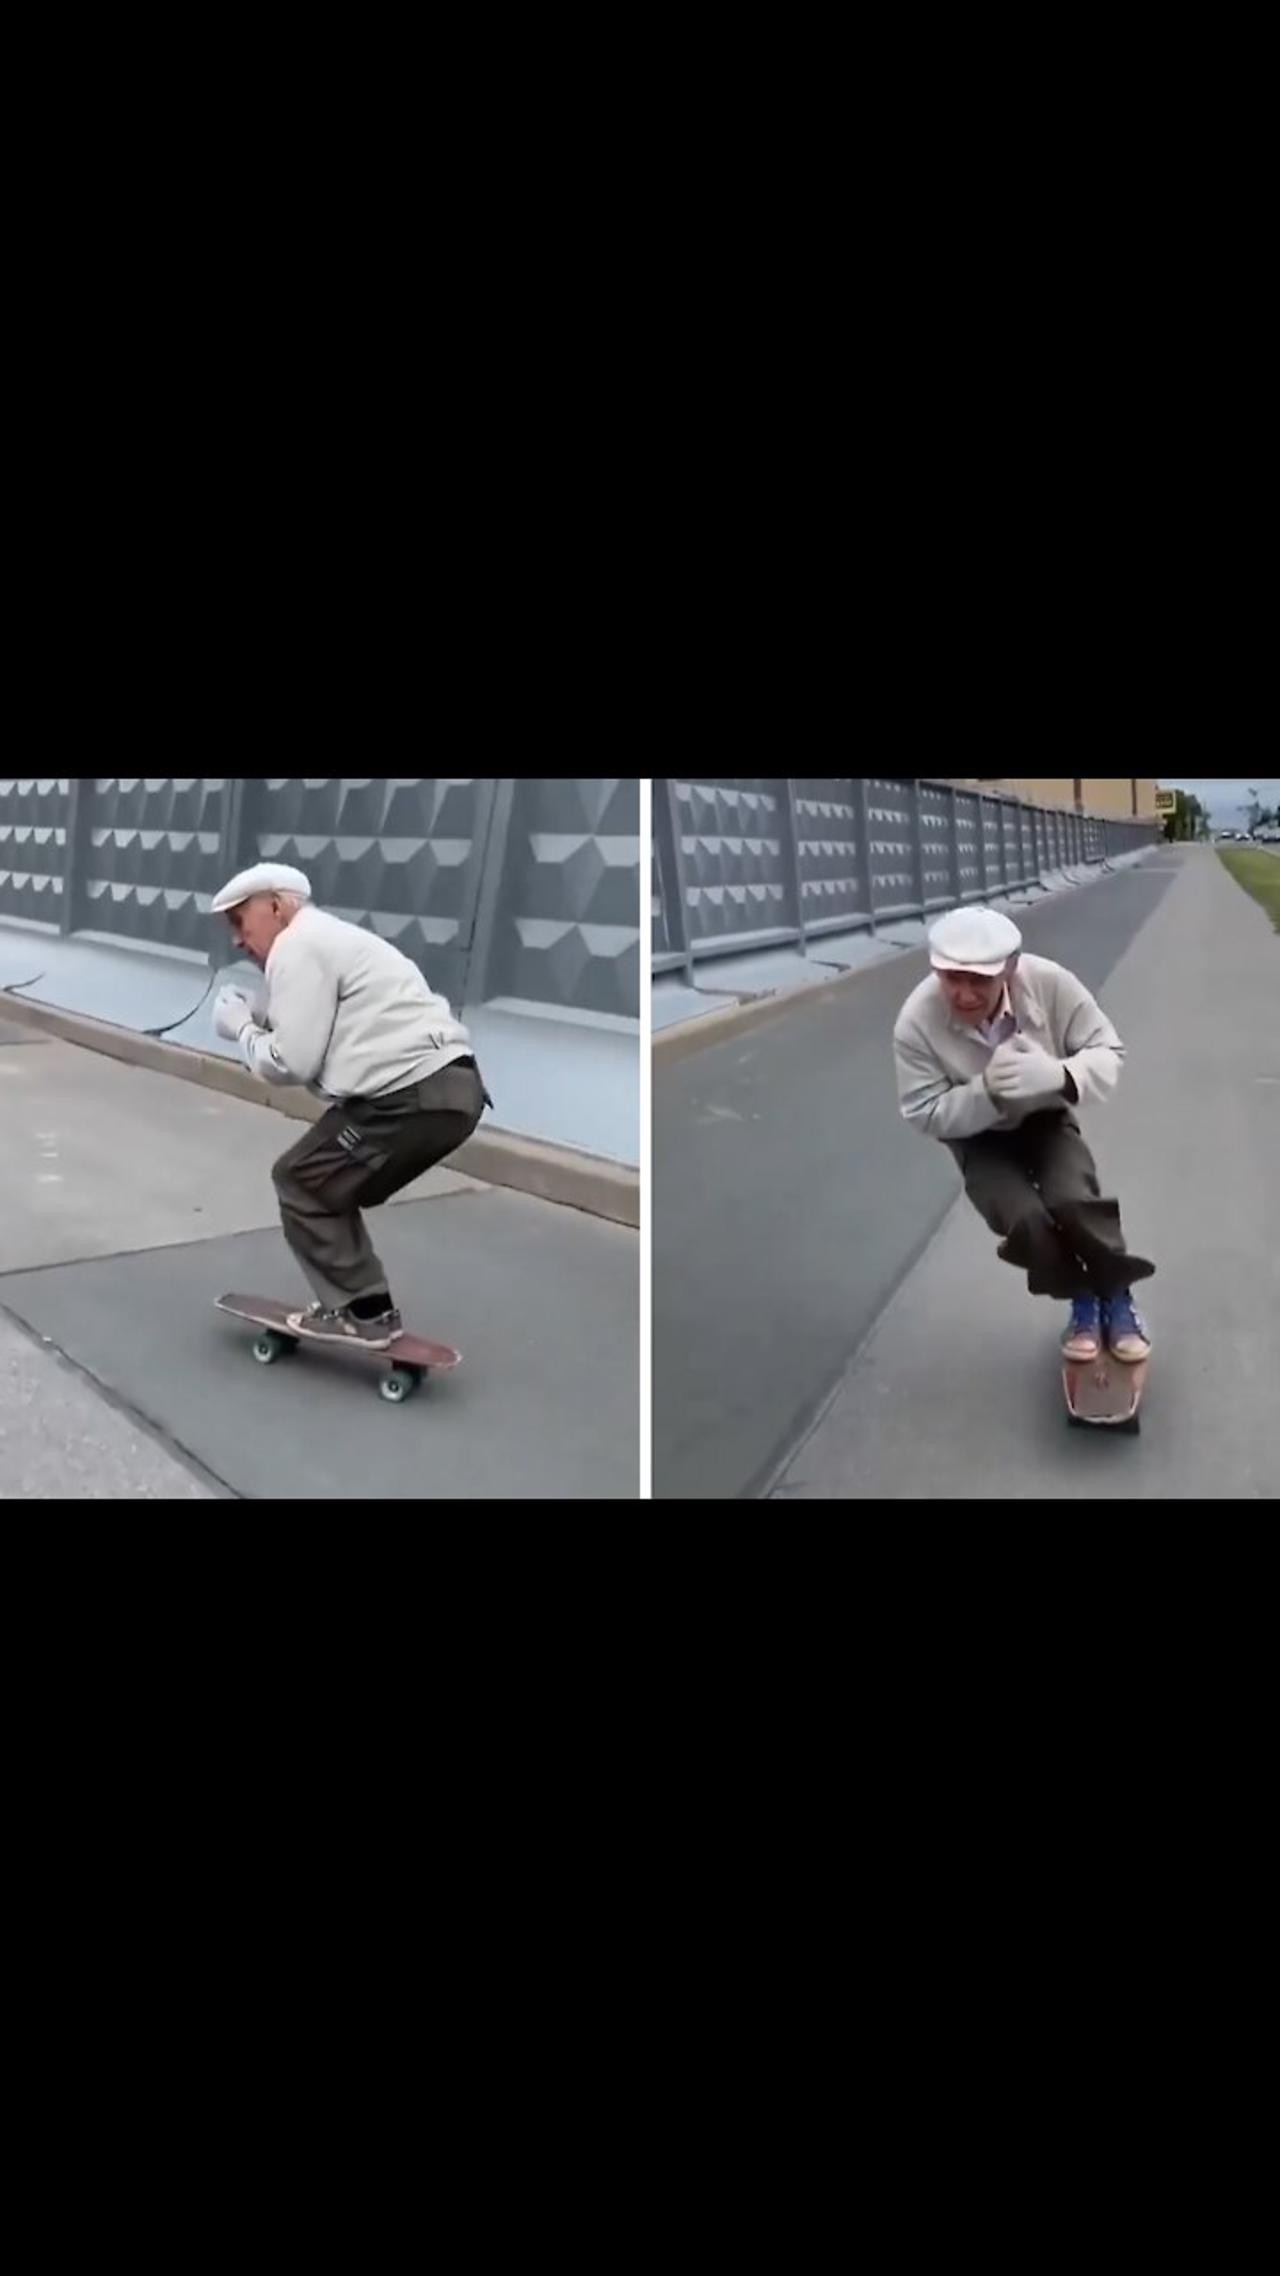 73-year-old man rides his board since 1981